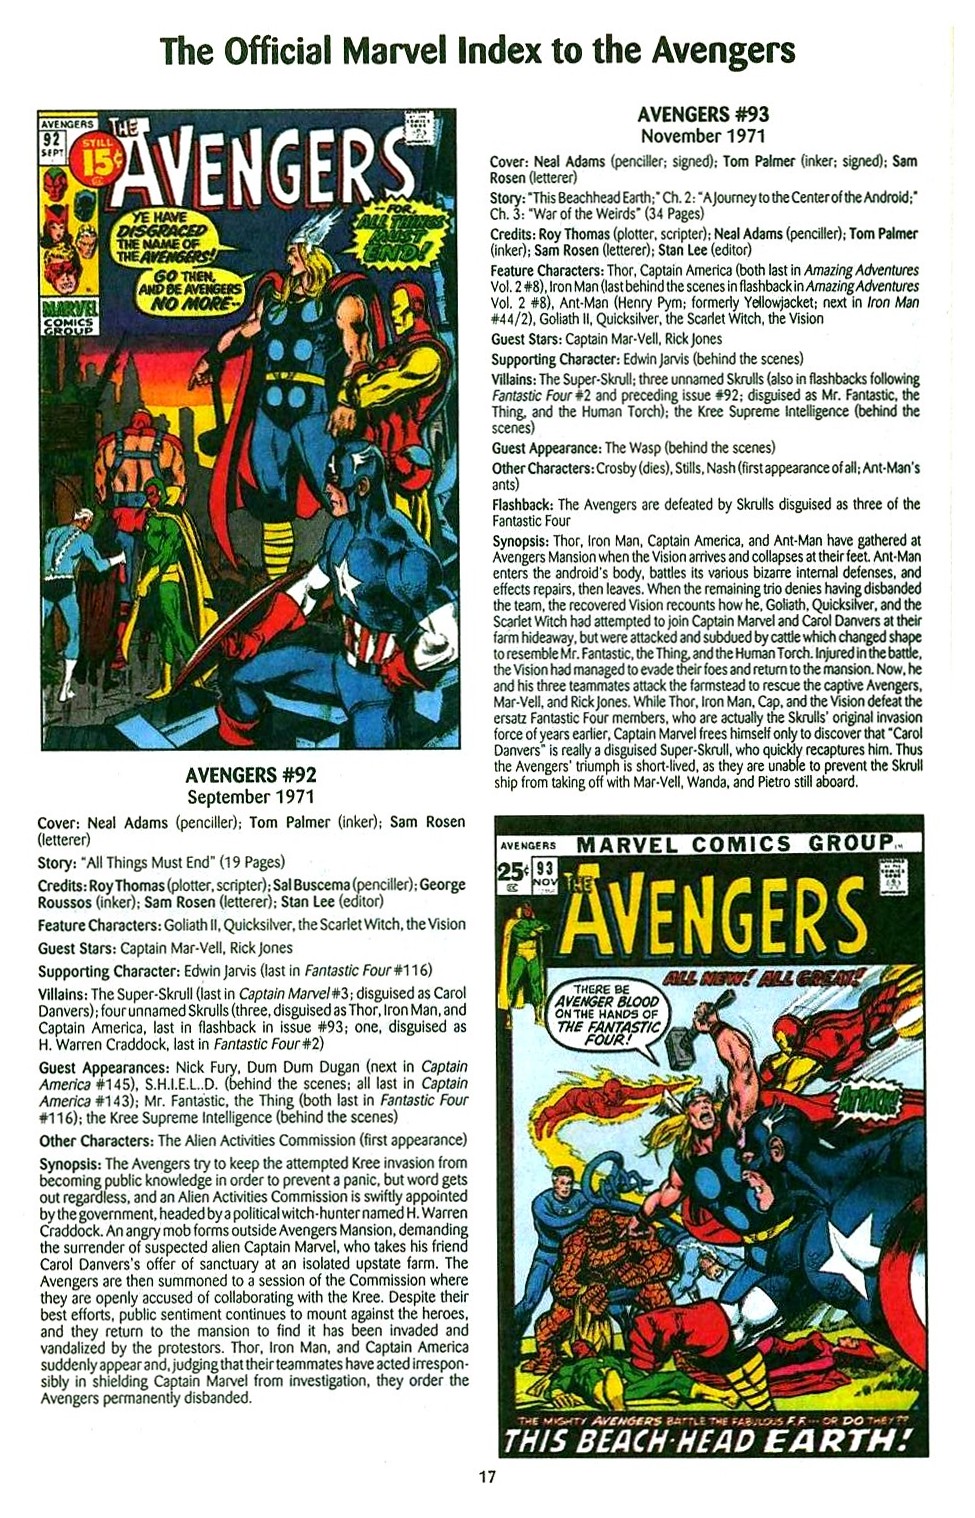 Read online The Official Marvel Index to the Avengers comic -  Issue #2 - 19